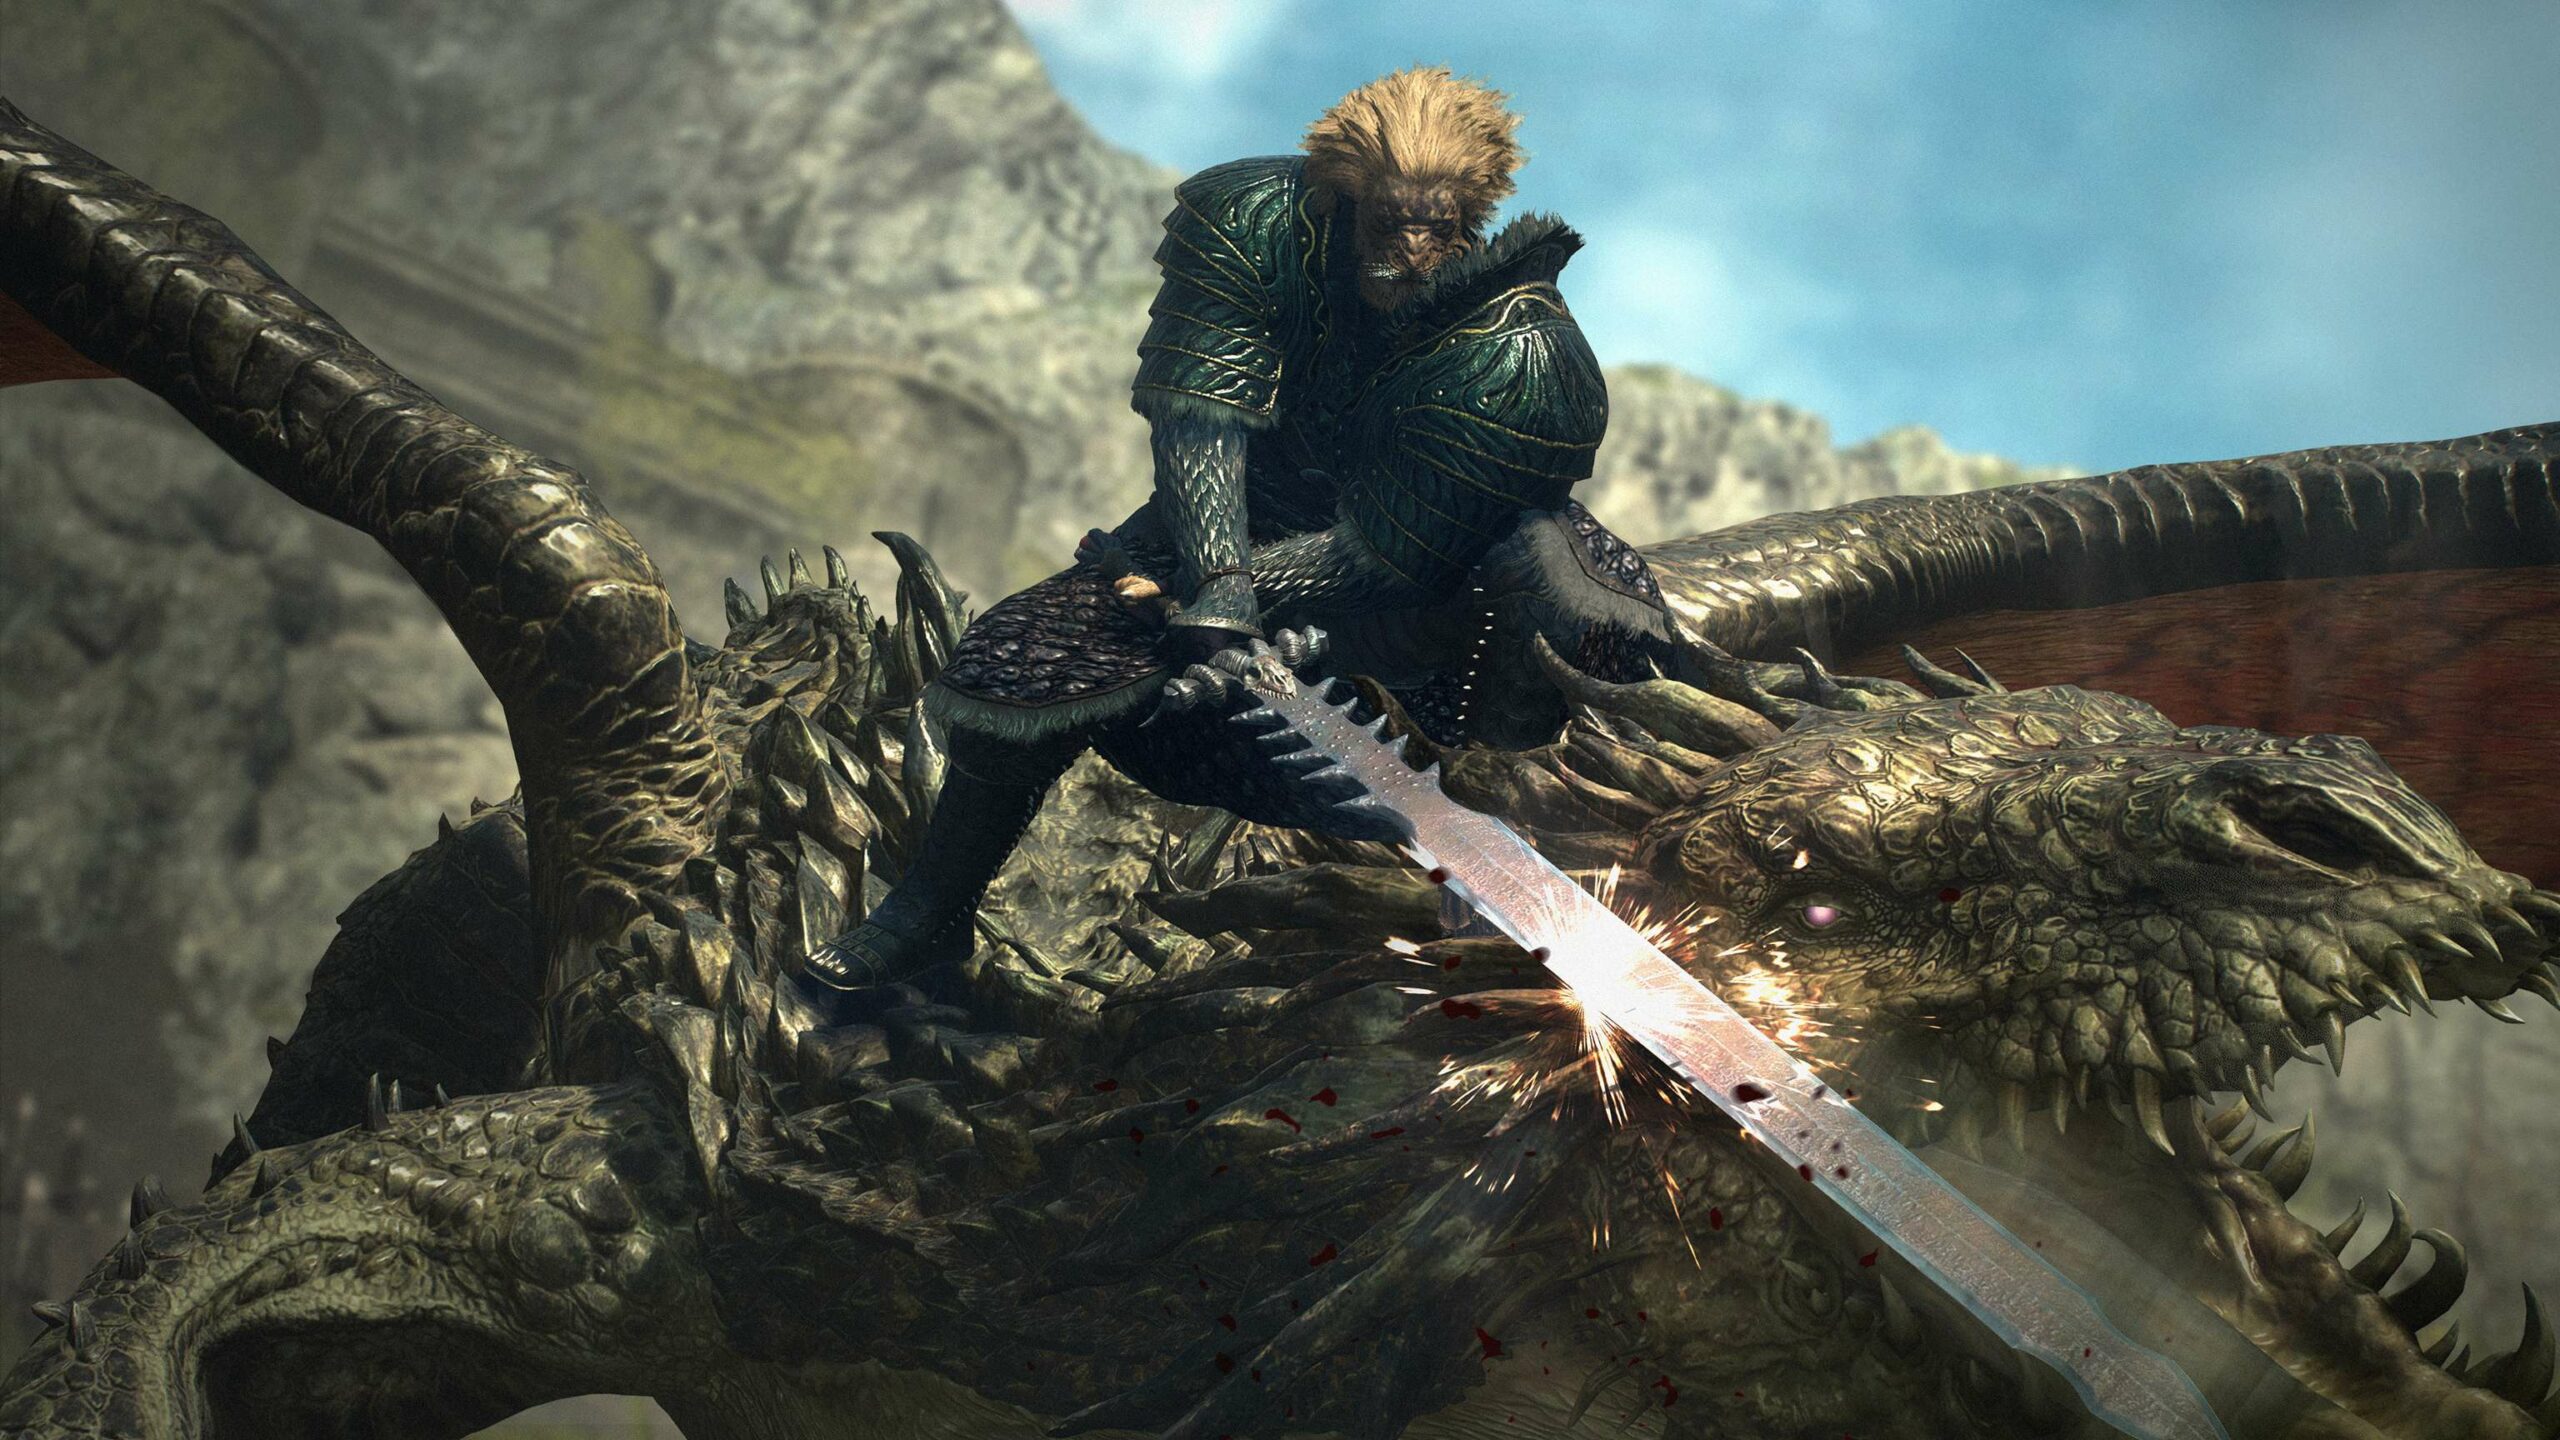 Dragon’s Dogma 2 Has Sold Over 2.5 Million Units, Get Updates Across All Platforms